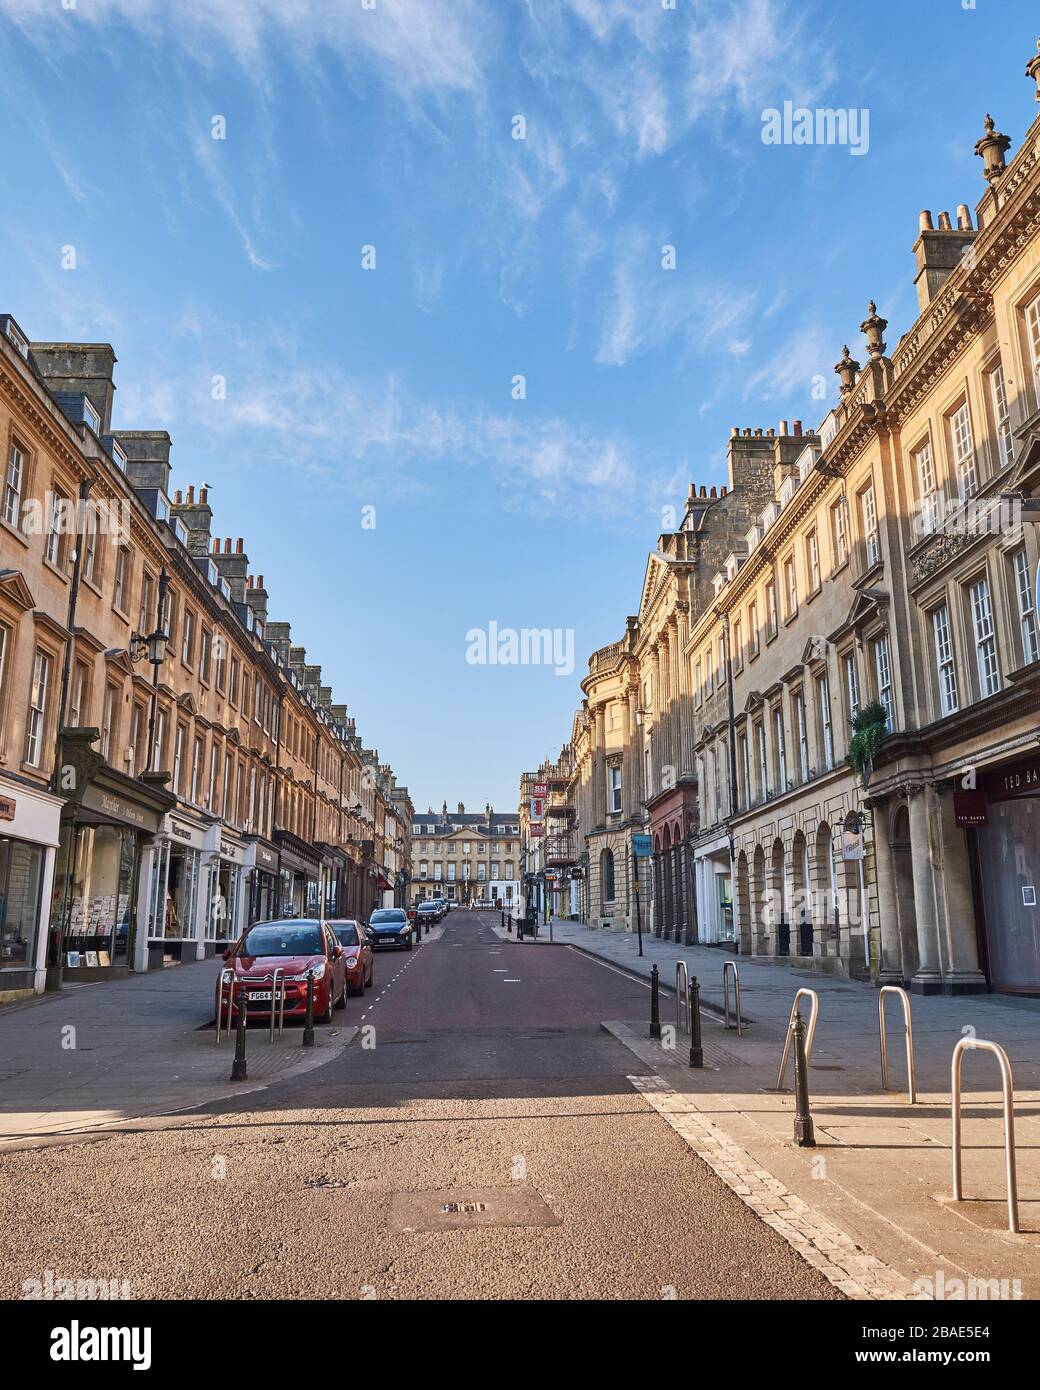 Bath, Somerset, England - March 26, 2020: The tourist city of Bath is deserted during the Coronavirus outbreak. Milsom Street Stock Photo